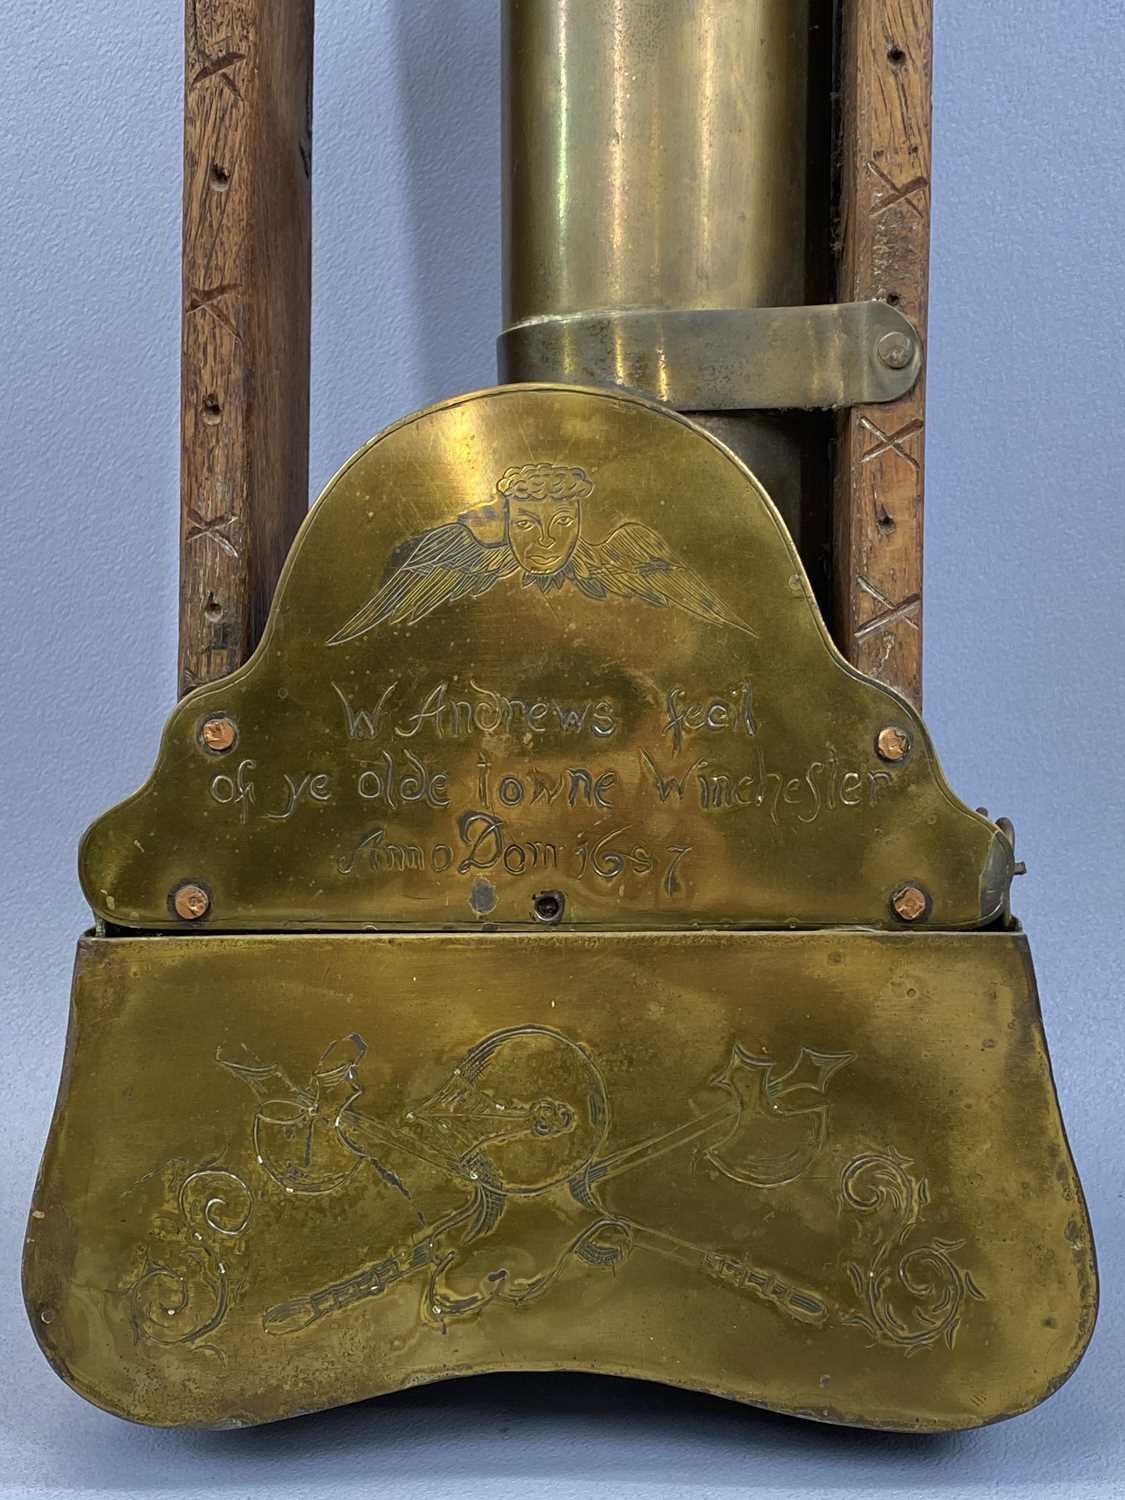 BRASS & CARVED OAK WATER CLOCK, engraved to the lower front plate 'W Andrews Fecit of Ye Olde - Image 4 of 5